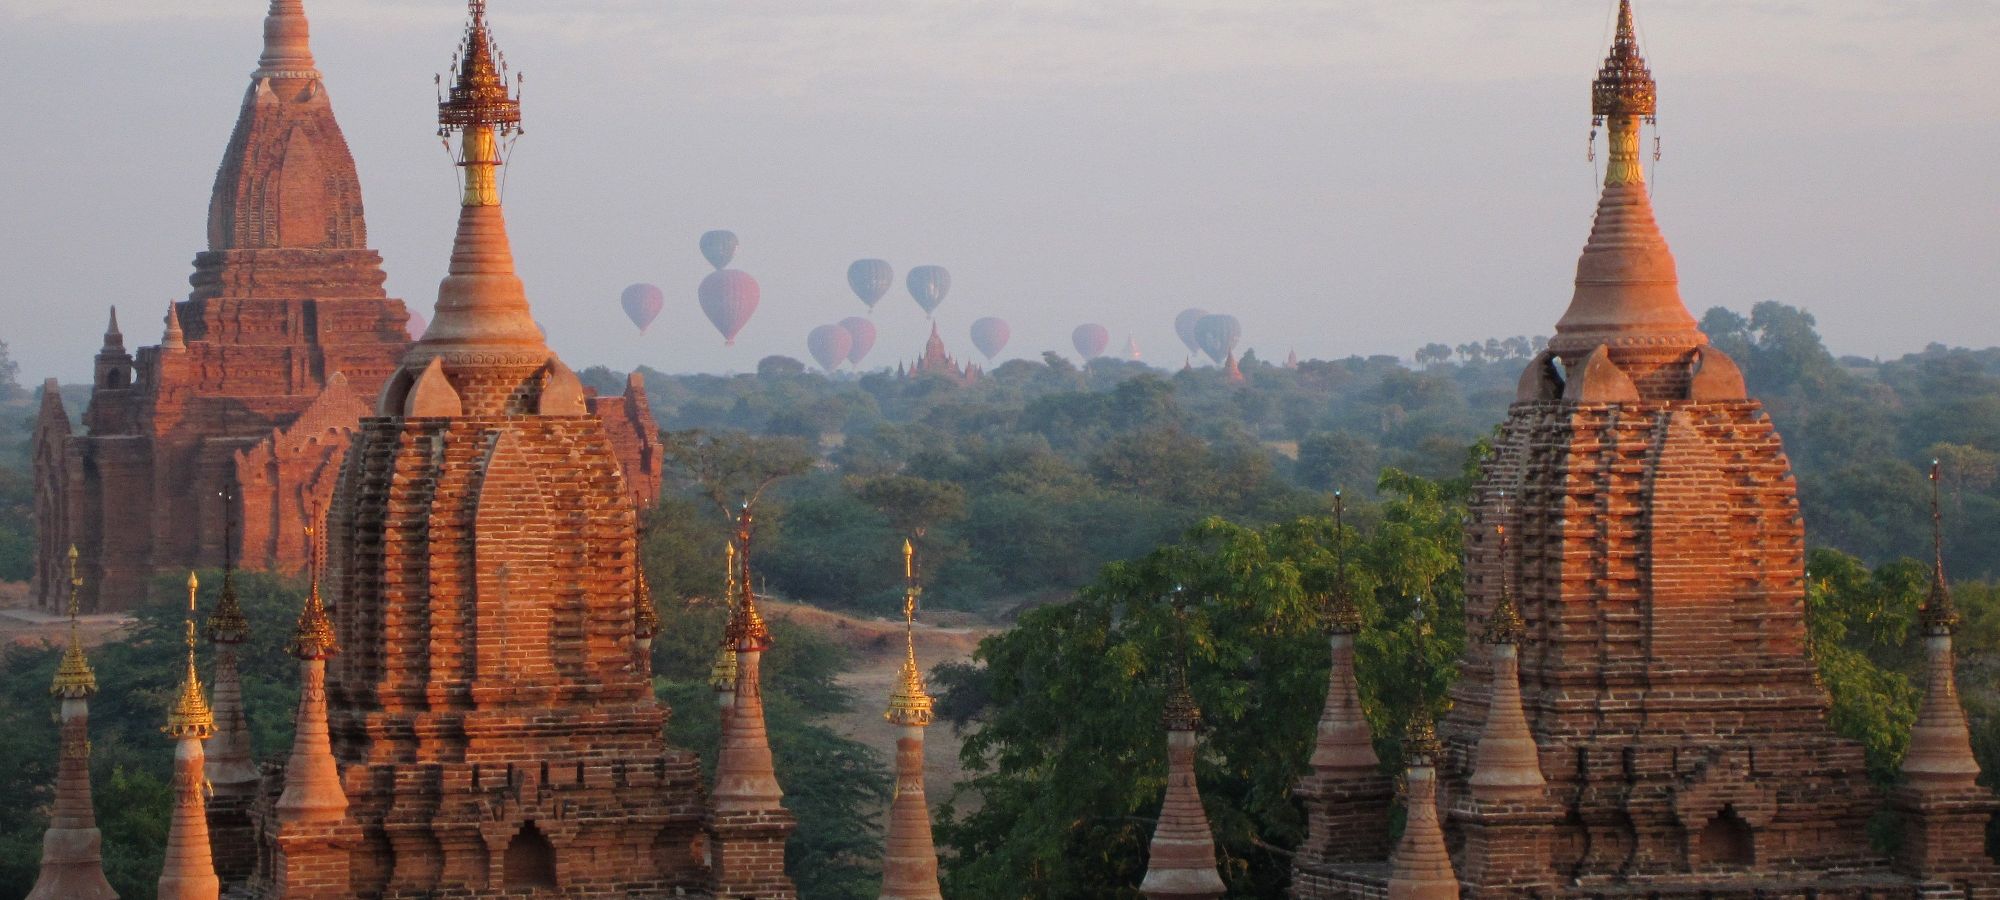 Photos from our Burma - Mountains, Beaches & Stupas Cycling Holiday